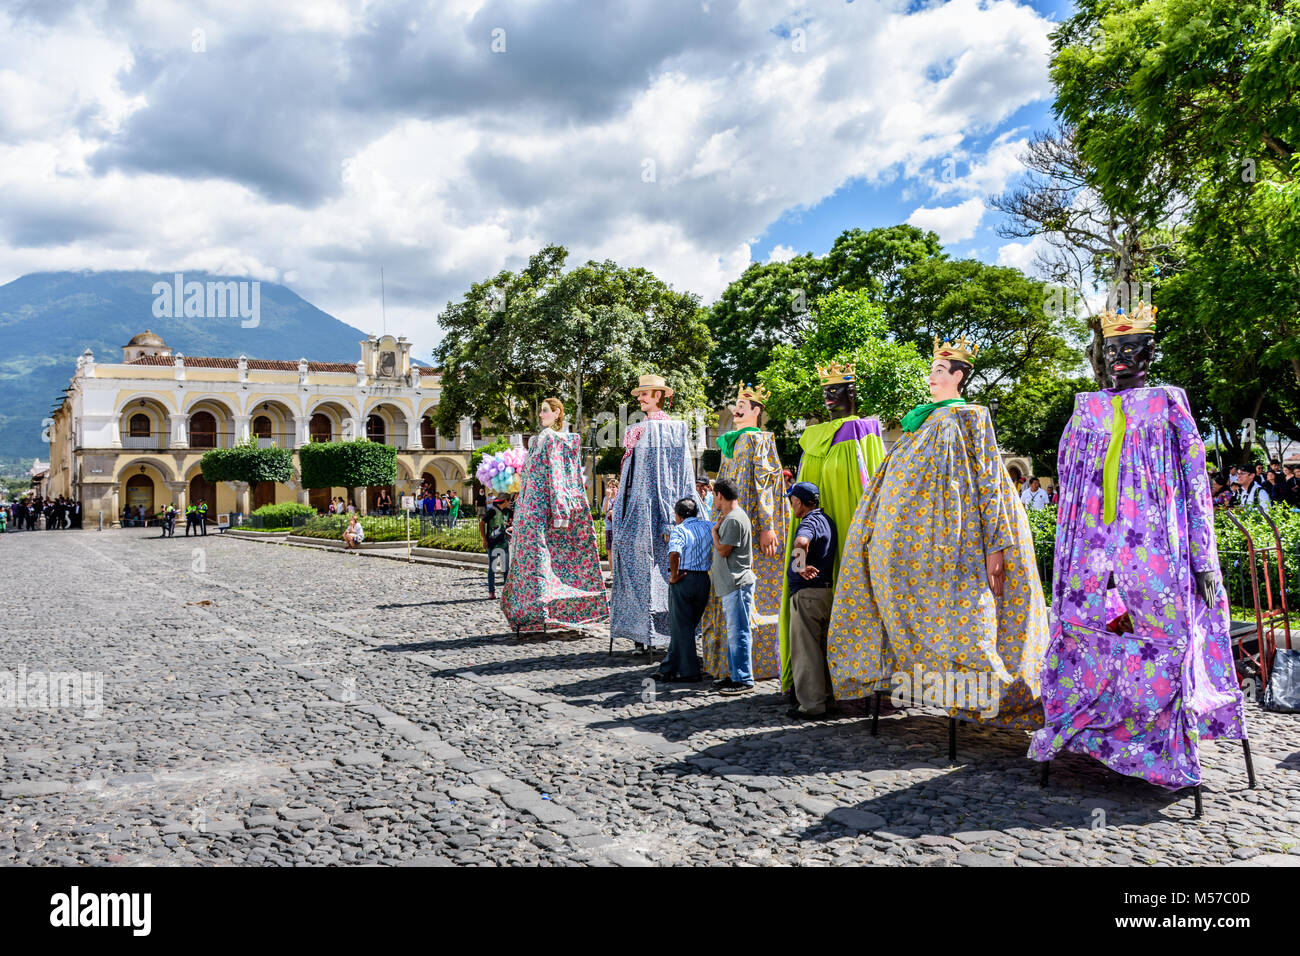 Antigua, Guatemala -  July 25, 2017: Traditional giant folk dancing puppets called gigantes on St Jame's Day, Antigua's patron saint day Stock Photo